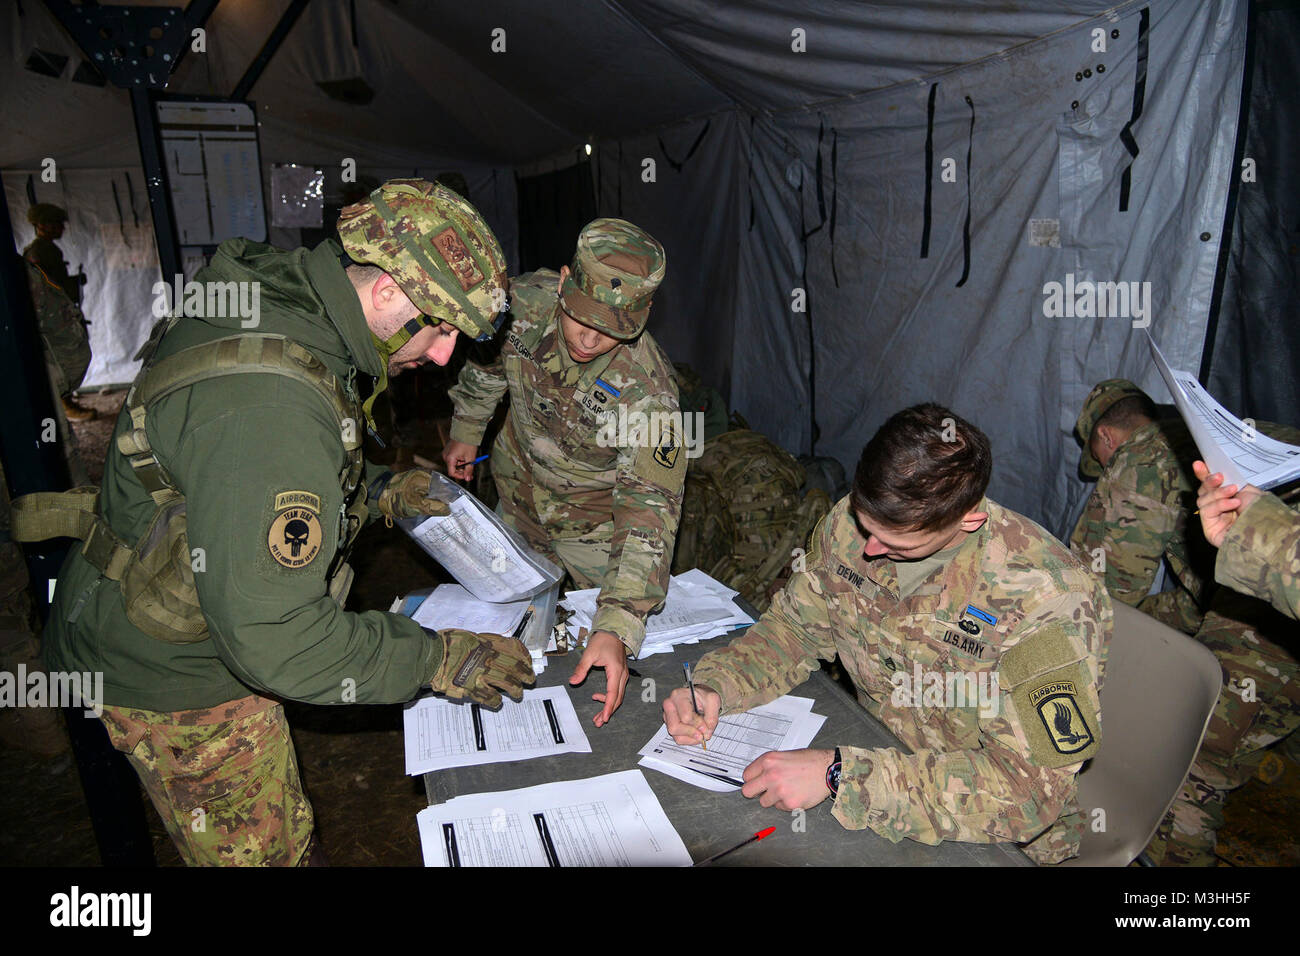 A Italian Army Paratrooper from Brigata Folgore, turns in his results during a land navigation for the weeklong testing for the Expert Infantryman Badge. The soldiers must complete a number of prerequisites and pass a battery of graded tests on basic Infantry skills Feb. 6, 2018 at Cellina Meduna area, Pordenone, Italy. (U.S. Army Stock Photo